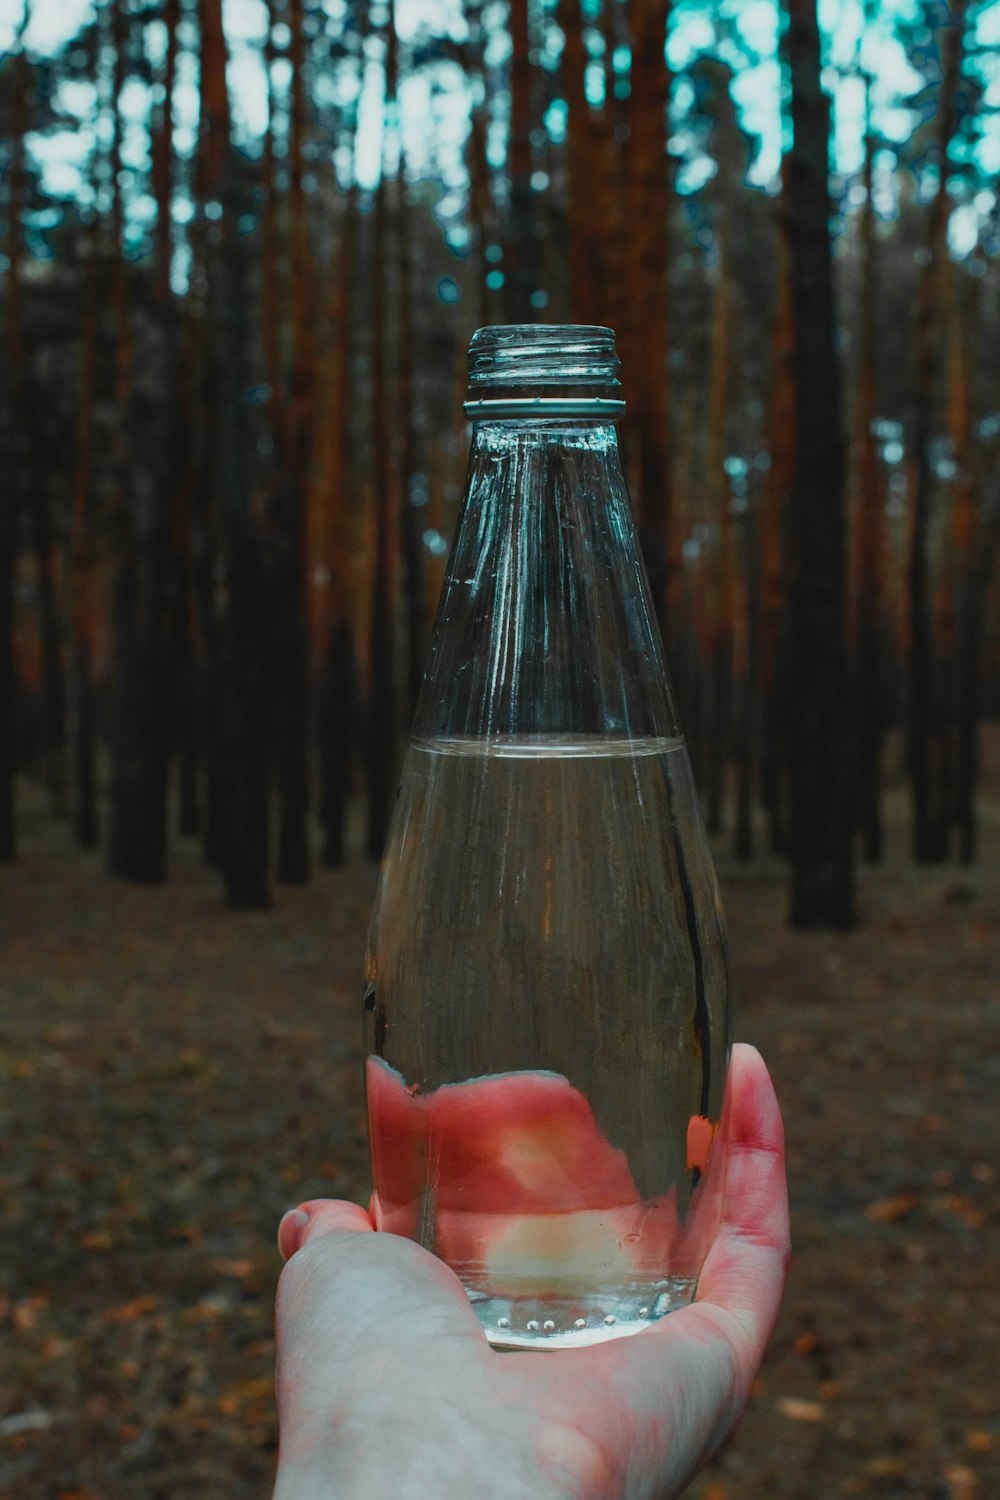 a person holding a glass bottle filled with liquid